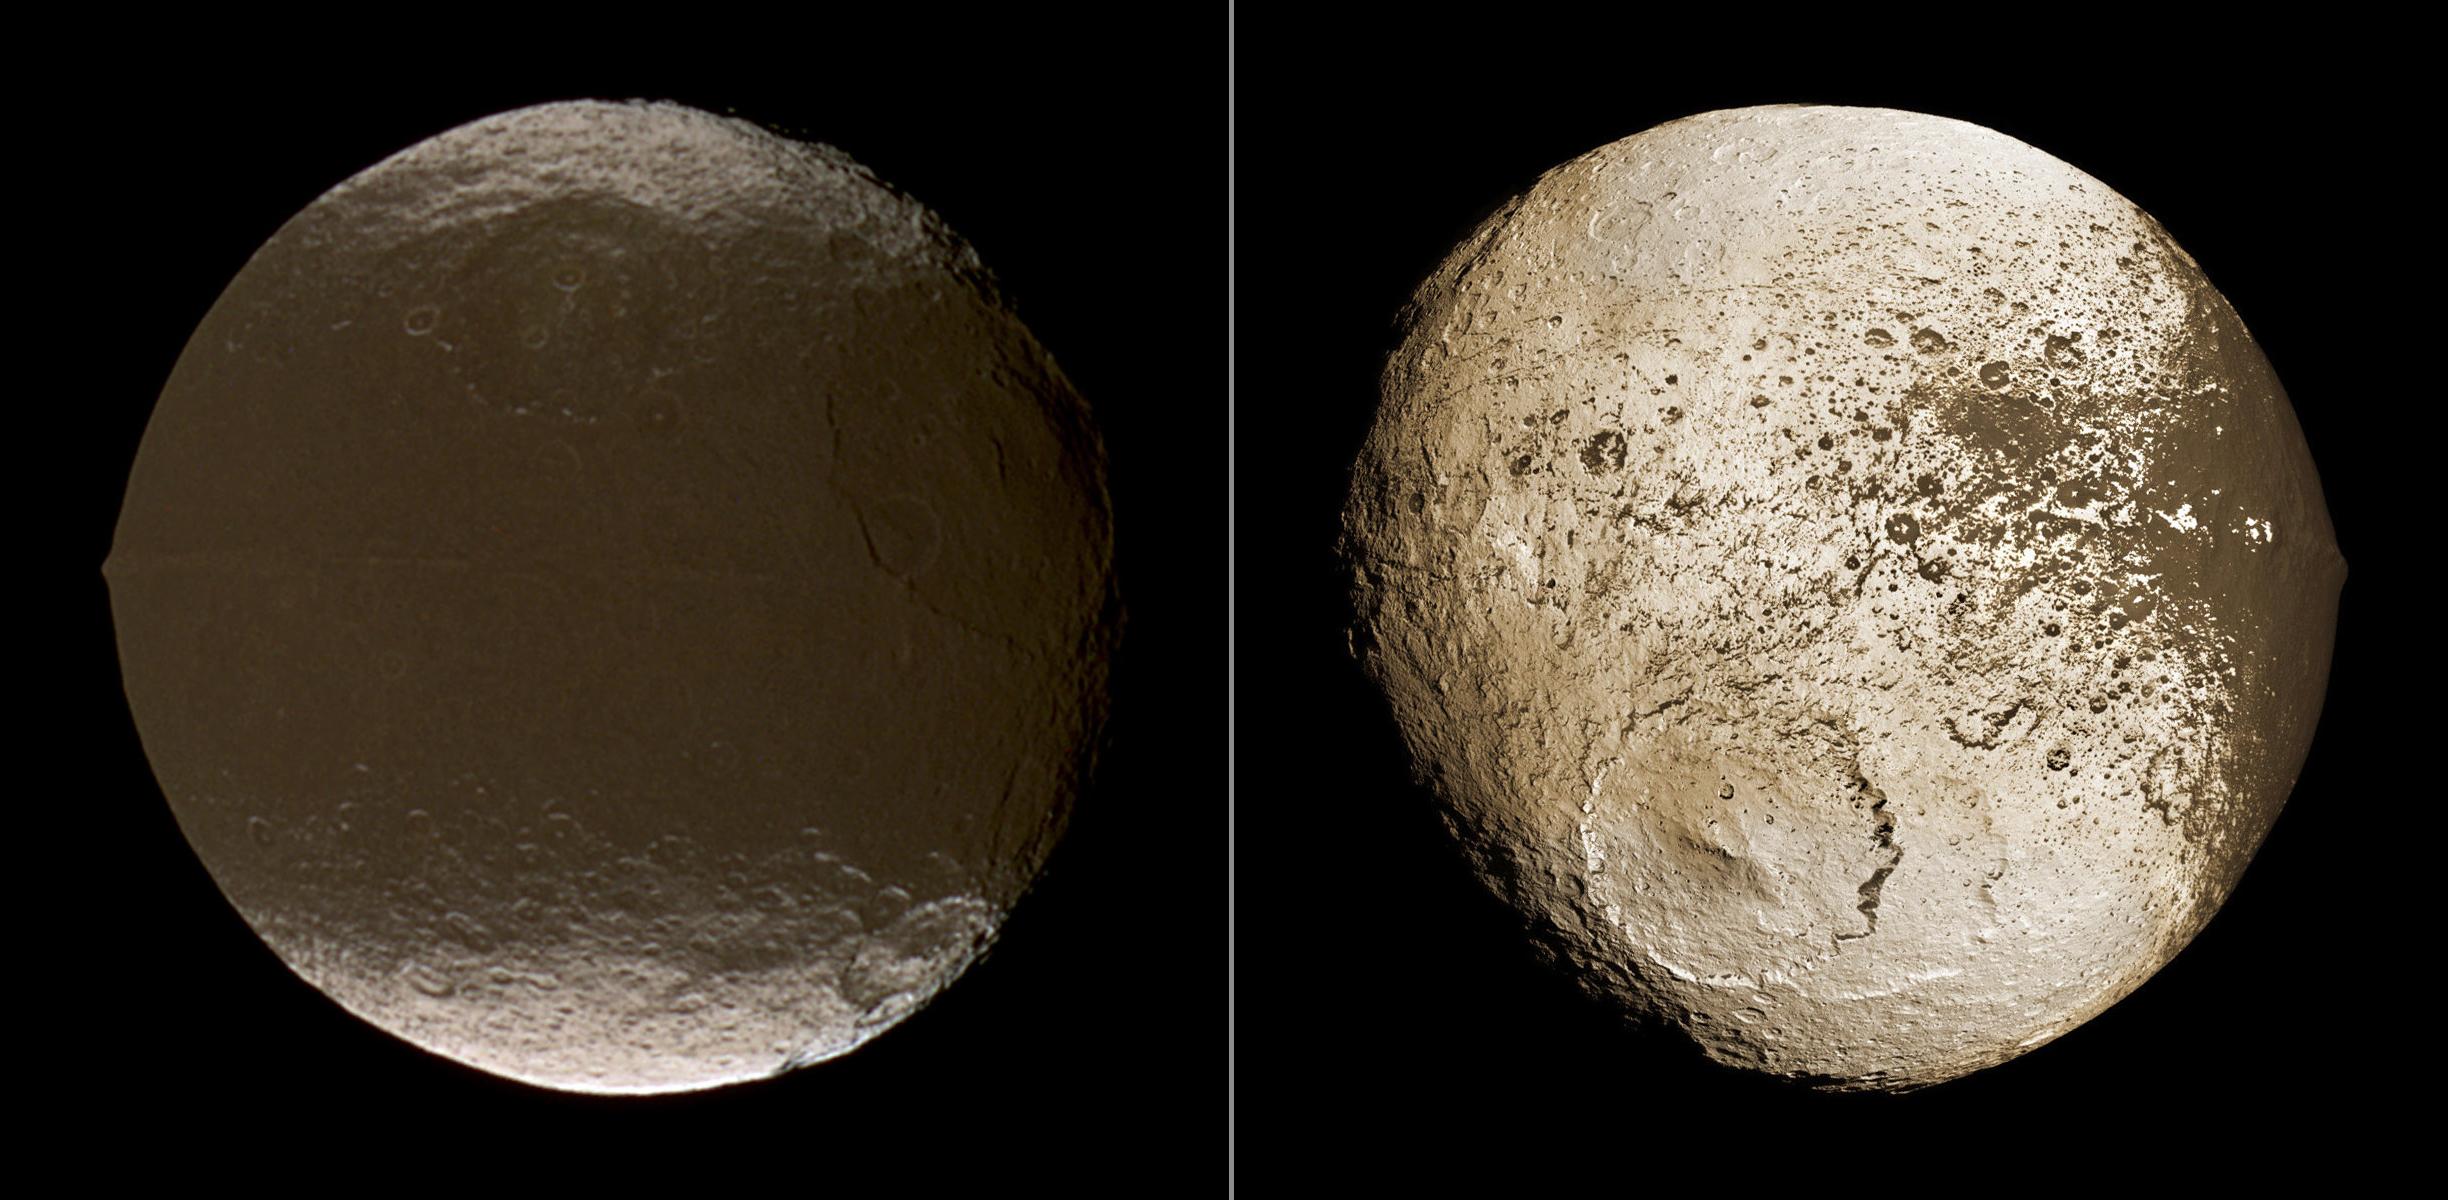 These two global images of Iapetus show the extreme brightness dichotomy on the surface of this peculiar Saturnian moon.